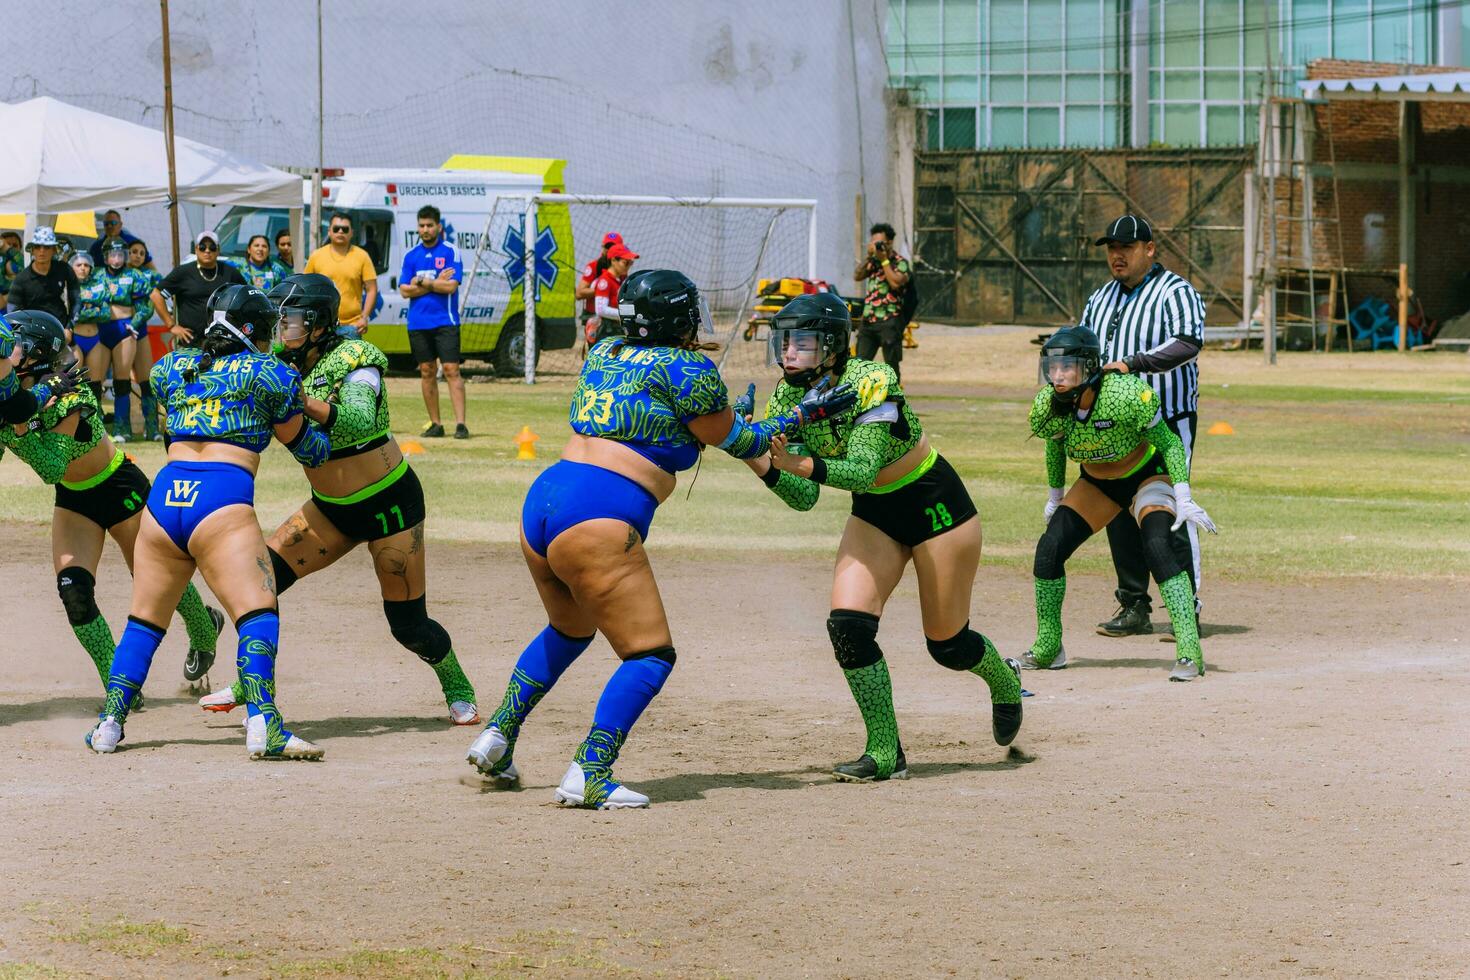 Puebla, Mexico 2023 - Friendly game of women's American football in Mexico on a flat field on a sunny day photo